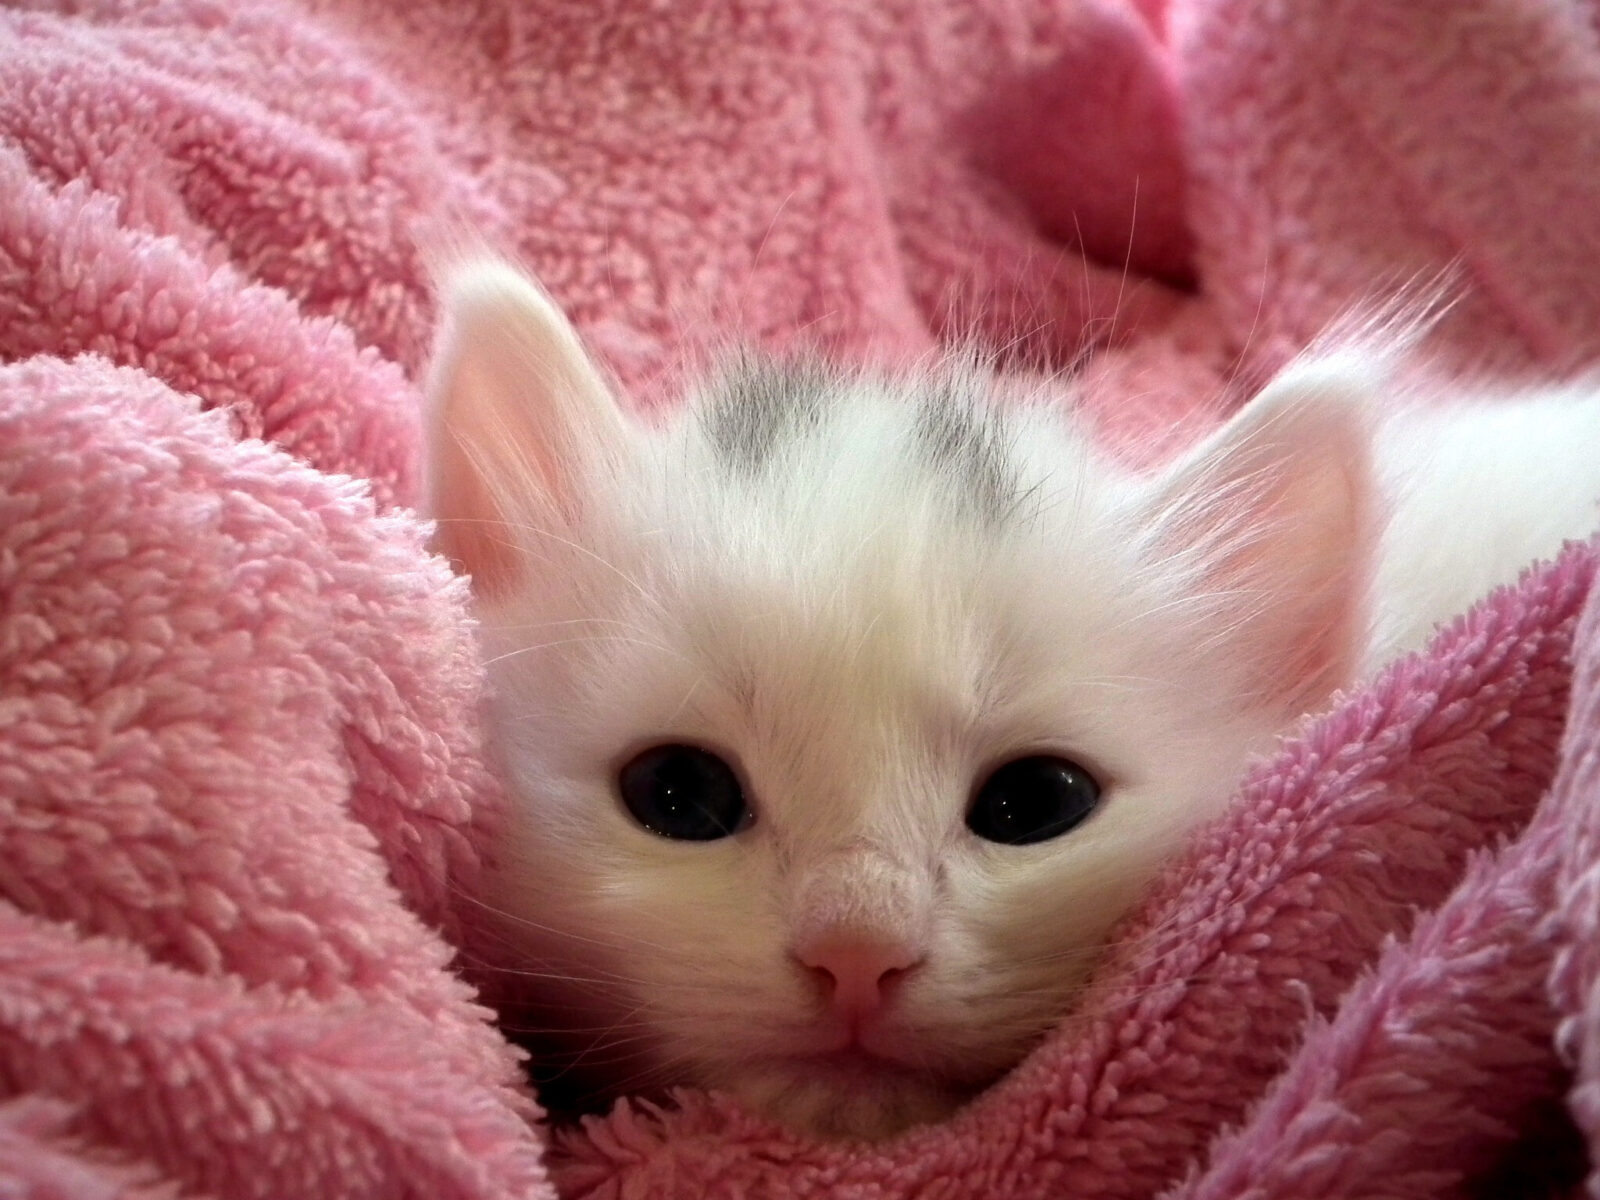 A white kitten is comfortably snuggled in a plush pink throw, looking at the camera